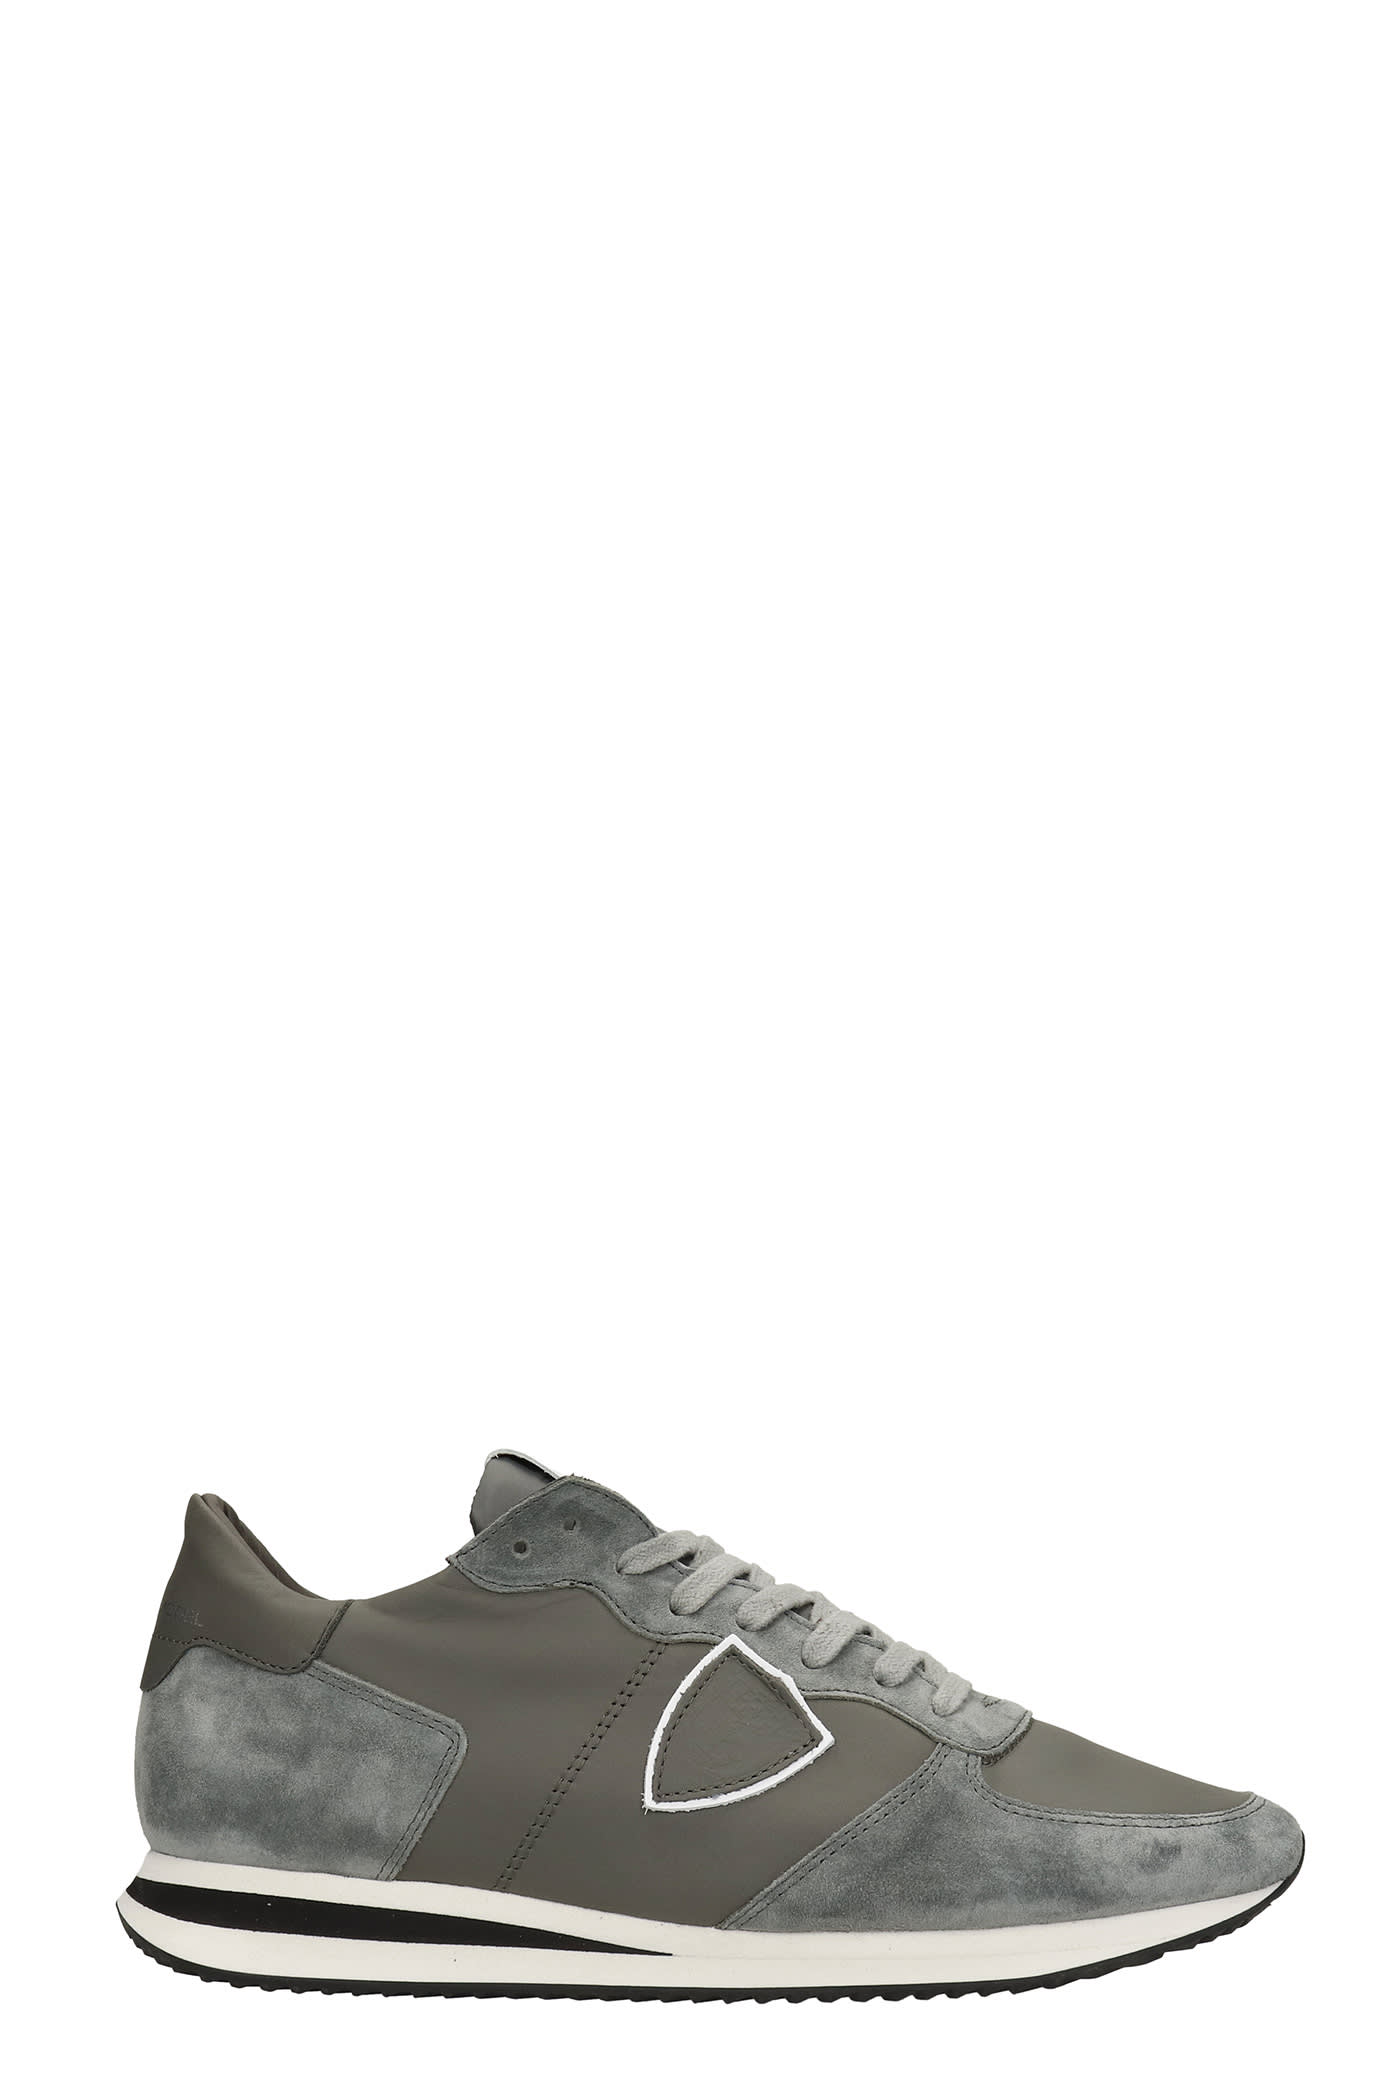 Philippe Model Trpx Sneakers In Grey Suede And Leather